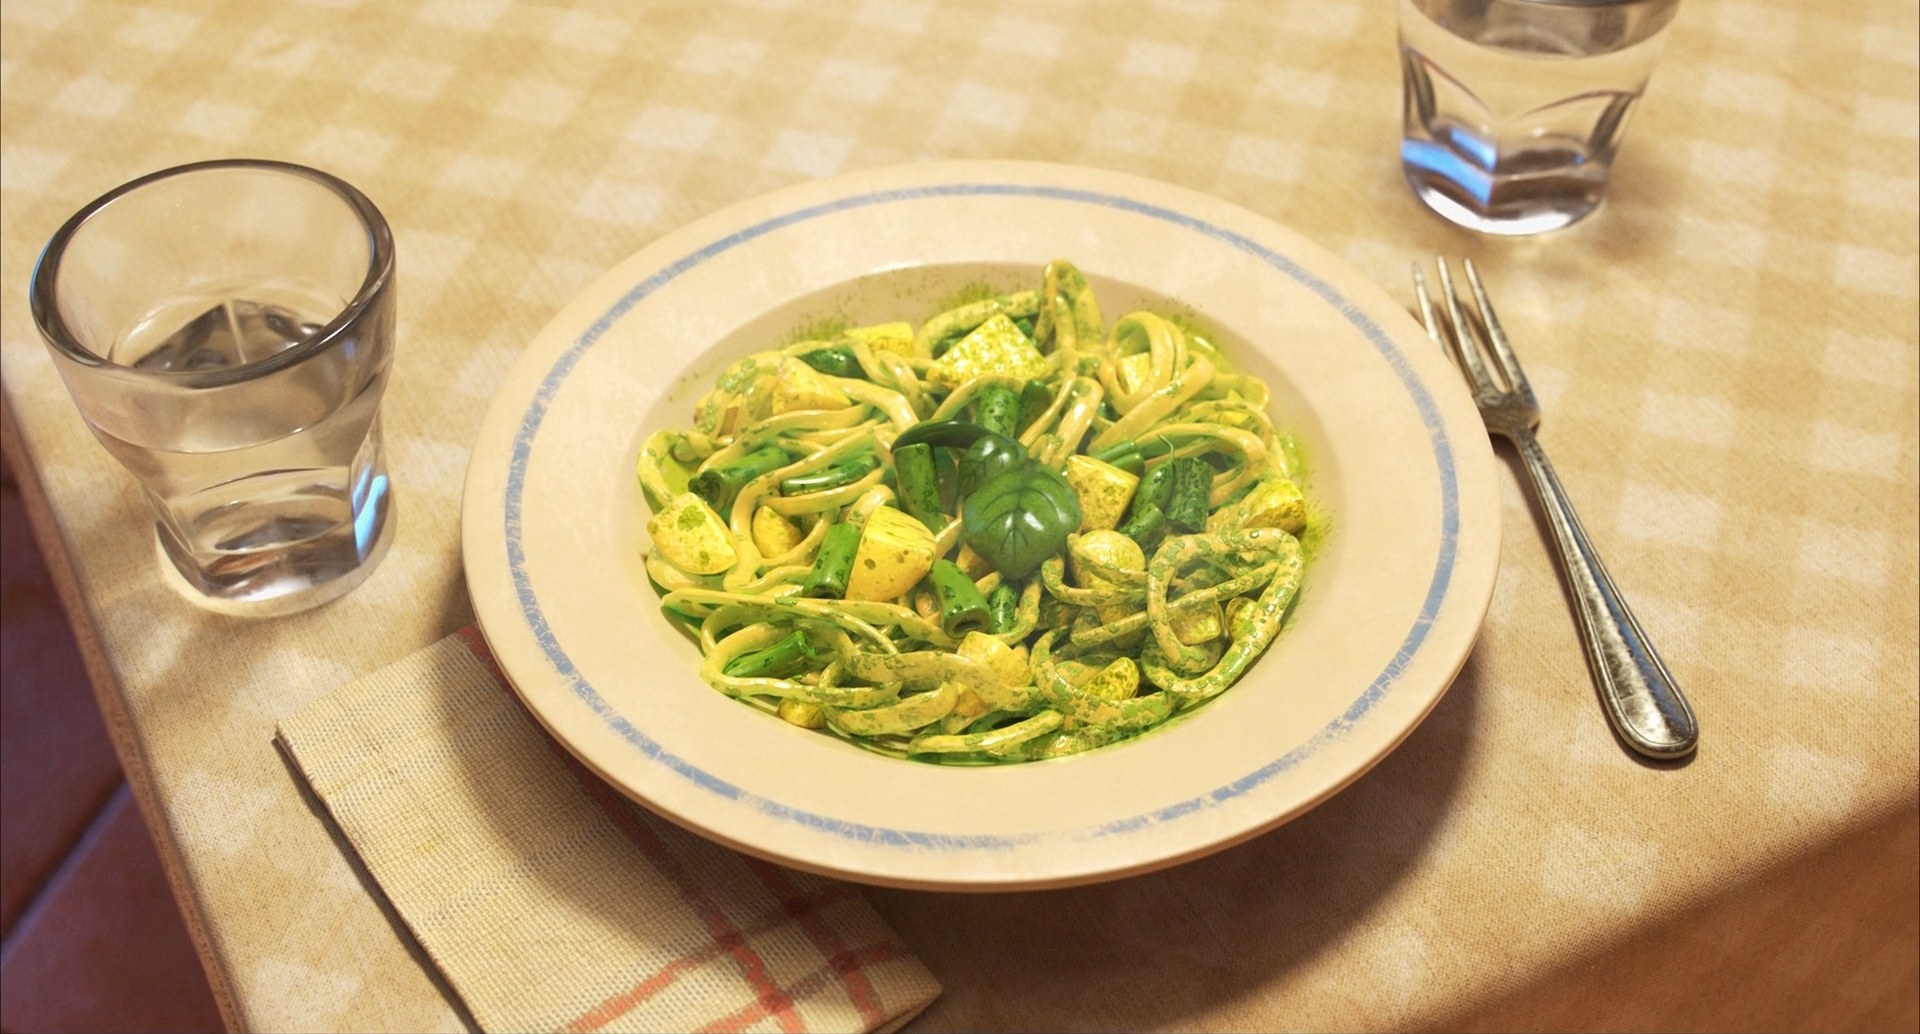 A yellow pasta dish with basil sprinkled on it in a white plate with two glasses of water